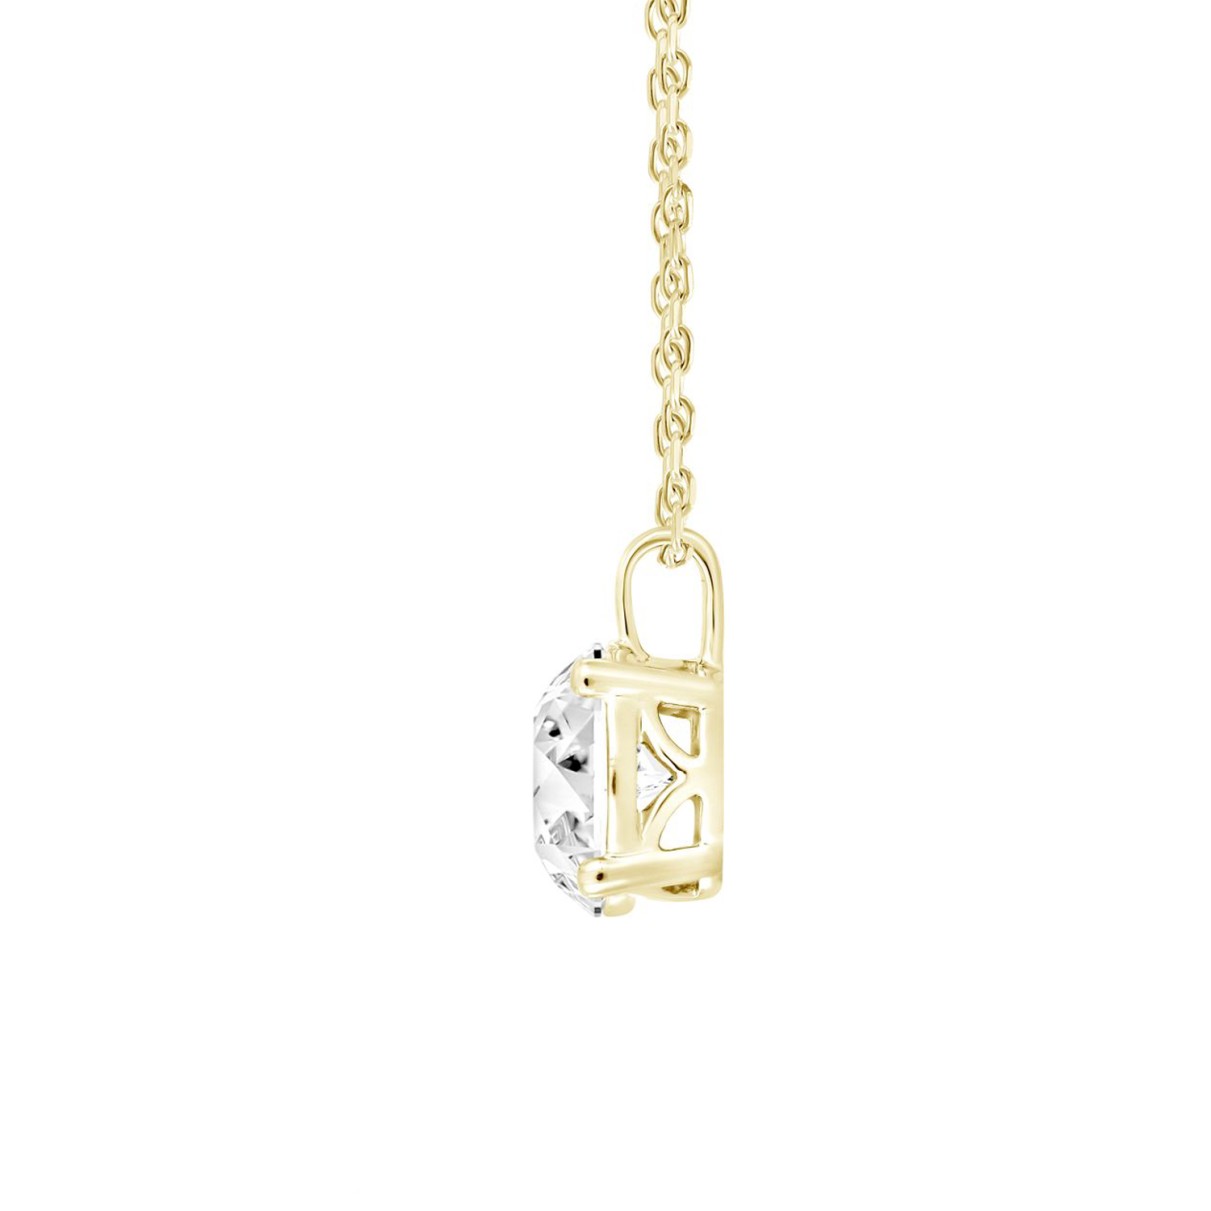 LADIES SOLITAIRE PENDANT WITH CHAIN 1 1/2CT ROUND DIAMOND 14K YELLOW GOLD